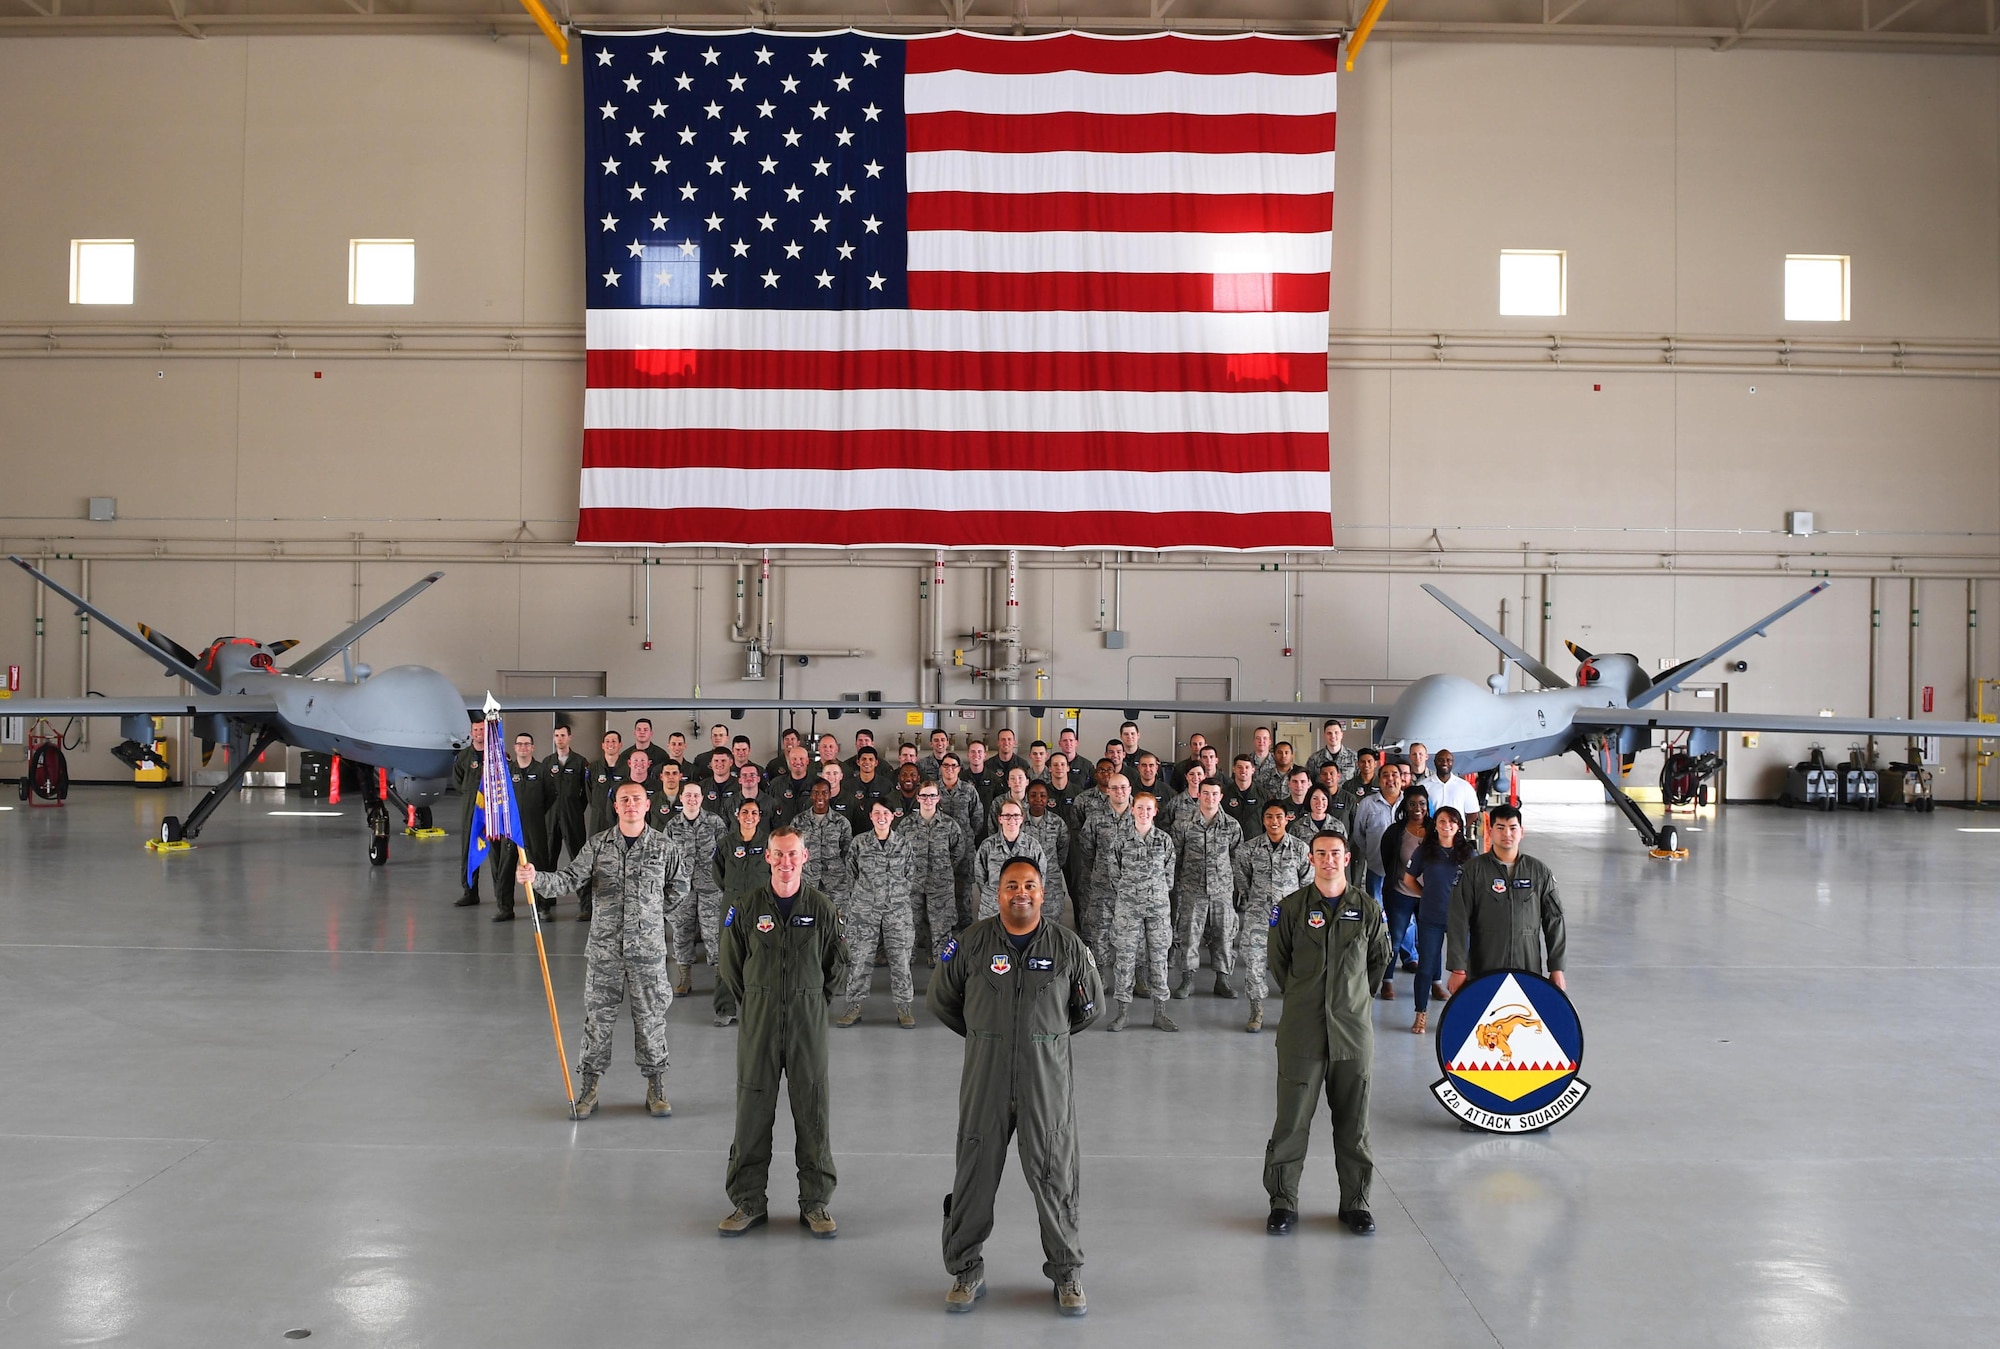 The 42nd Attack Squadron reach it's centennial anniversary June 13, 2017. It's lineage can be traced back to World War I where it was a training unit before being re-designated in the mid-1930's as a bombardment squadron. During World War II, the 42nd flew bomber aircraft such as the B-18 Bolo, B-17 Flying Fortress and B-24 Liberator in six aerial campaigns during World War II over the Pacific theater including the Battle of Midway. In 1963, the unit inactivated and briefly returned in 1989 as an air refueling squadron, but soon inactivated again in 1990. In 2006, the 42nd became the first MQ-9 Reaper squadron and continues today providing dominant persistent attack and reconnaissance to the combatant commanders 24/7/365. (U.S. Air Force photo/Senior Airman Christian Clausen)